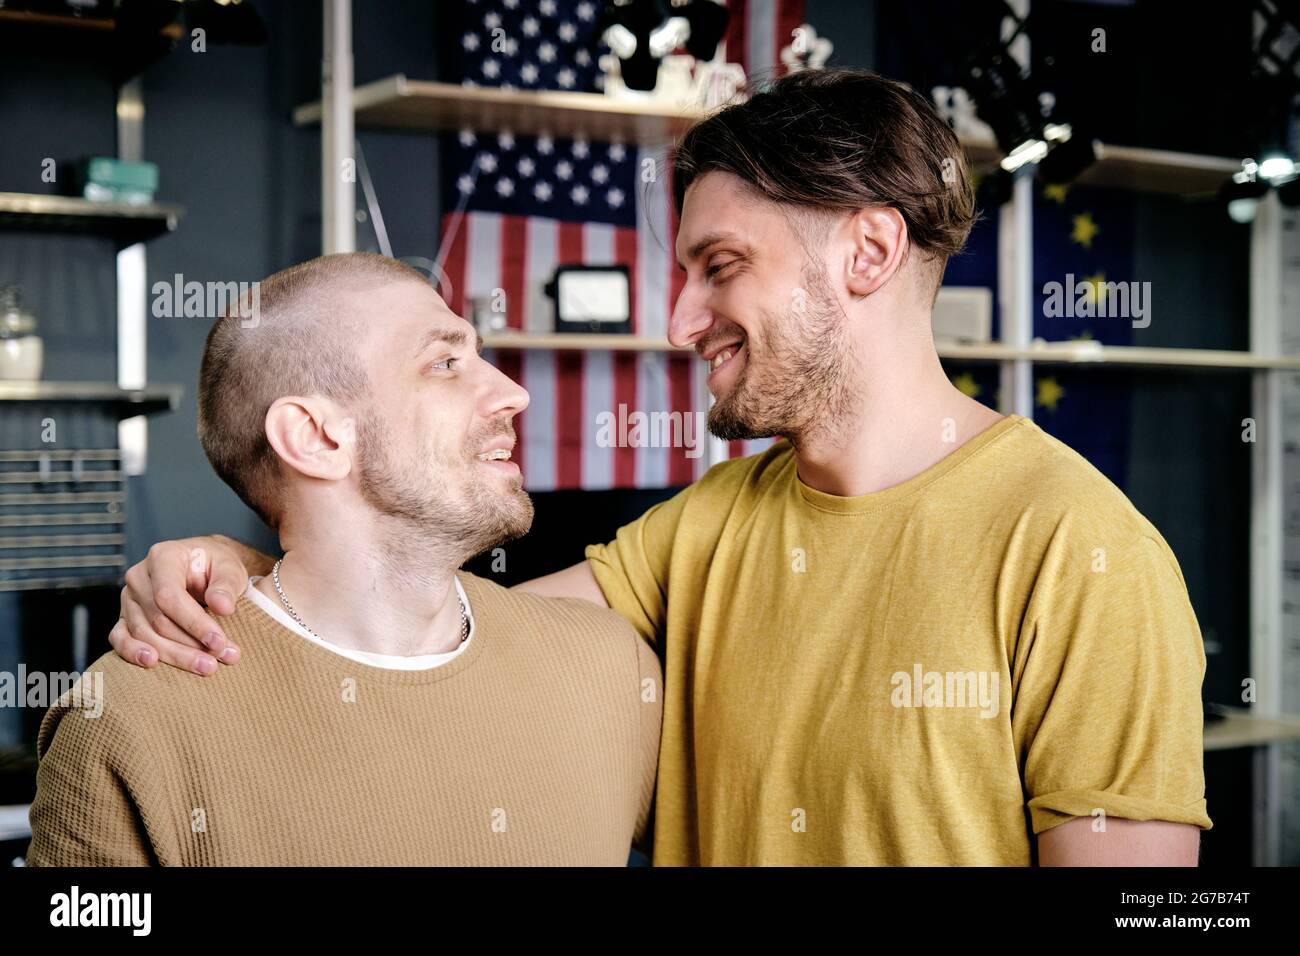 Two young affectionate gay men embracing and looking at each other Stock Photo